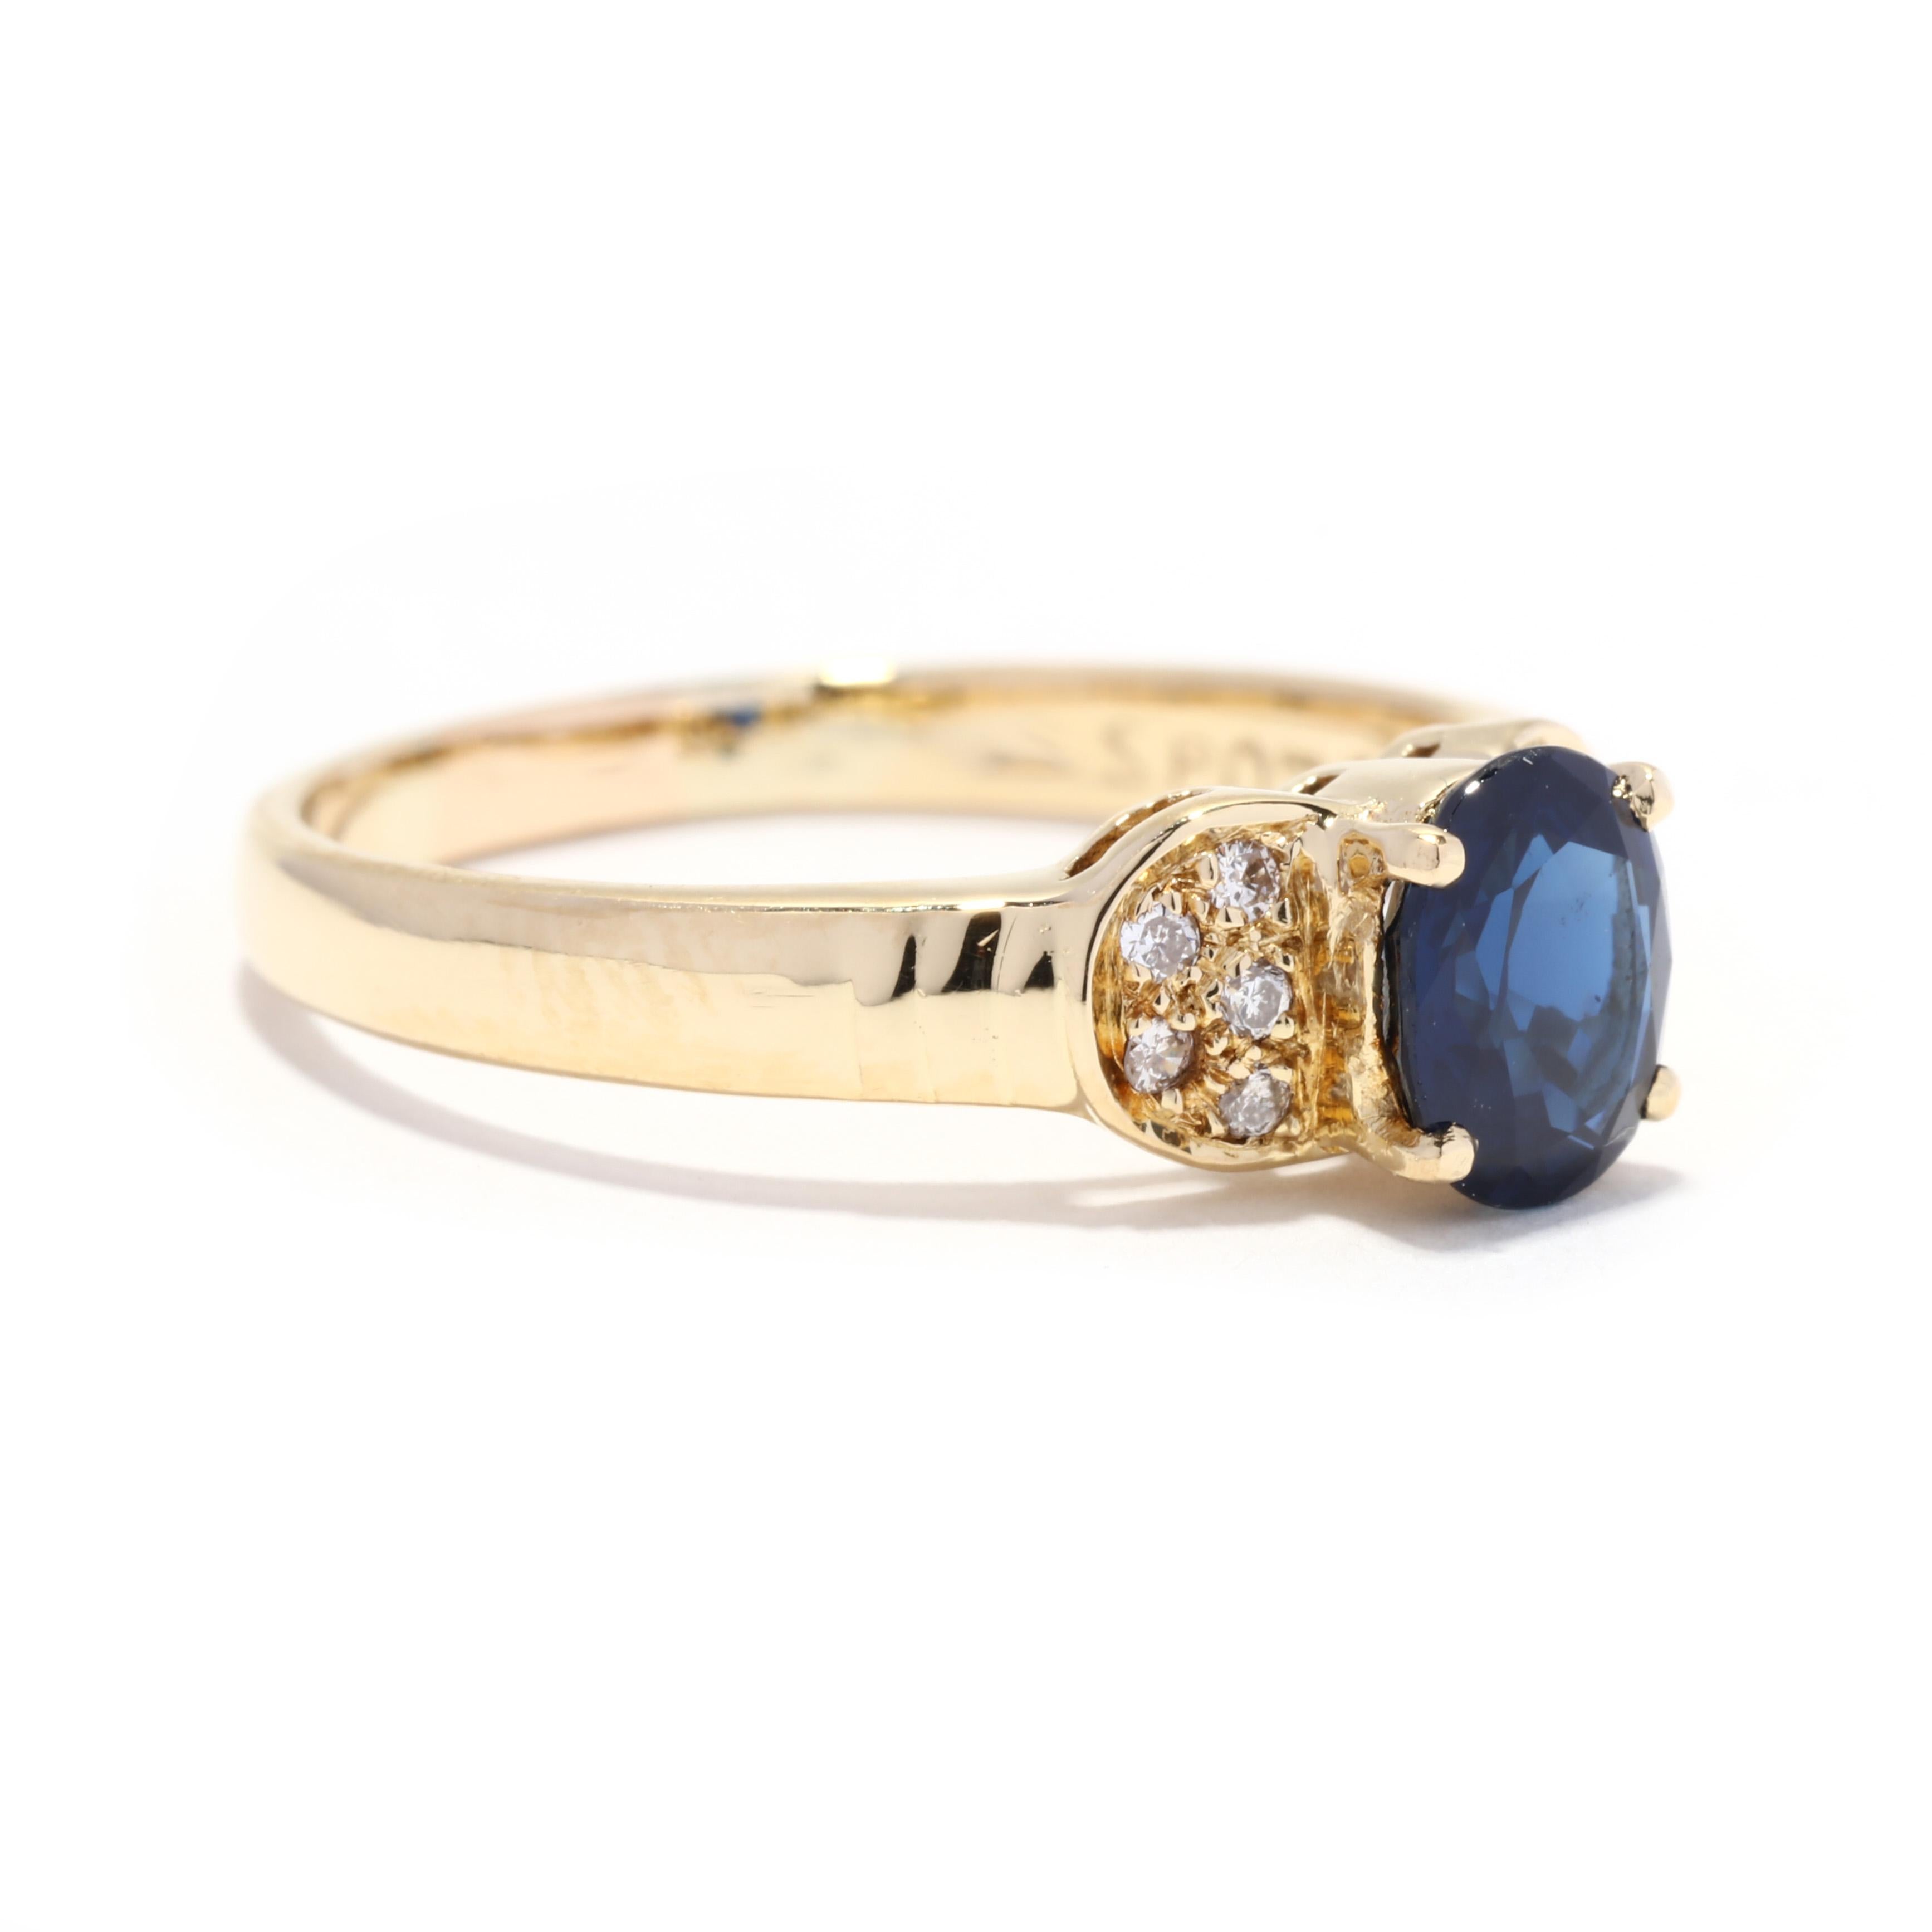 A vintage 18 karat yellow gold sapphire and diamond ring. This engagement ring features an oval natural sapphire weighing approximately .75 carat with a cluster of diamonds on either side and with a tapered band.

Stones:
- sapphire, 1 stone
- oval